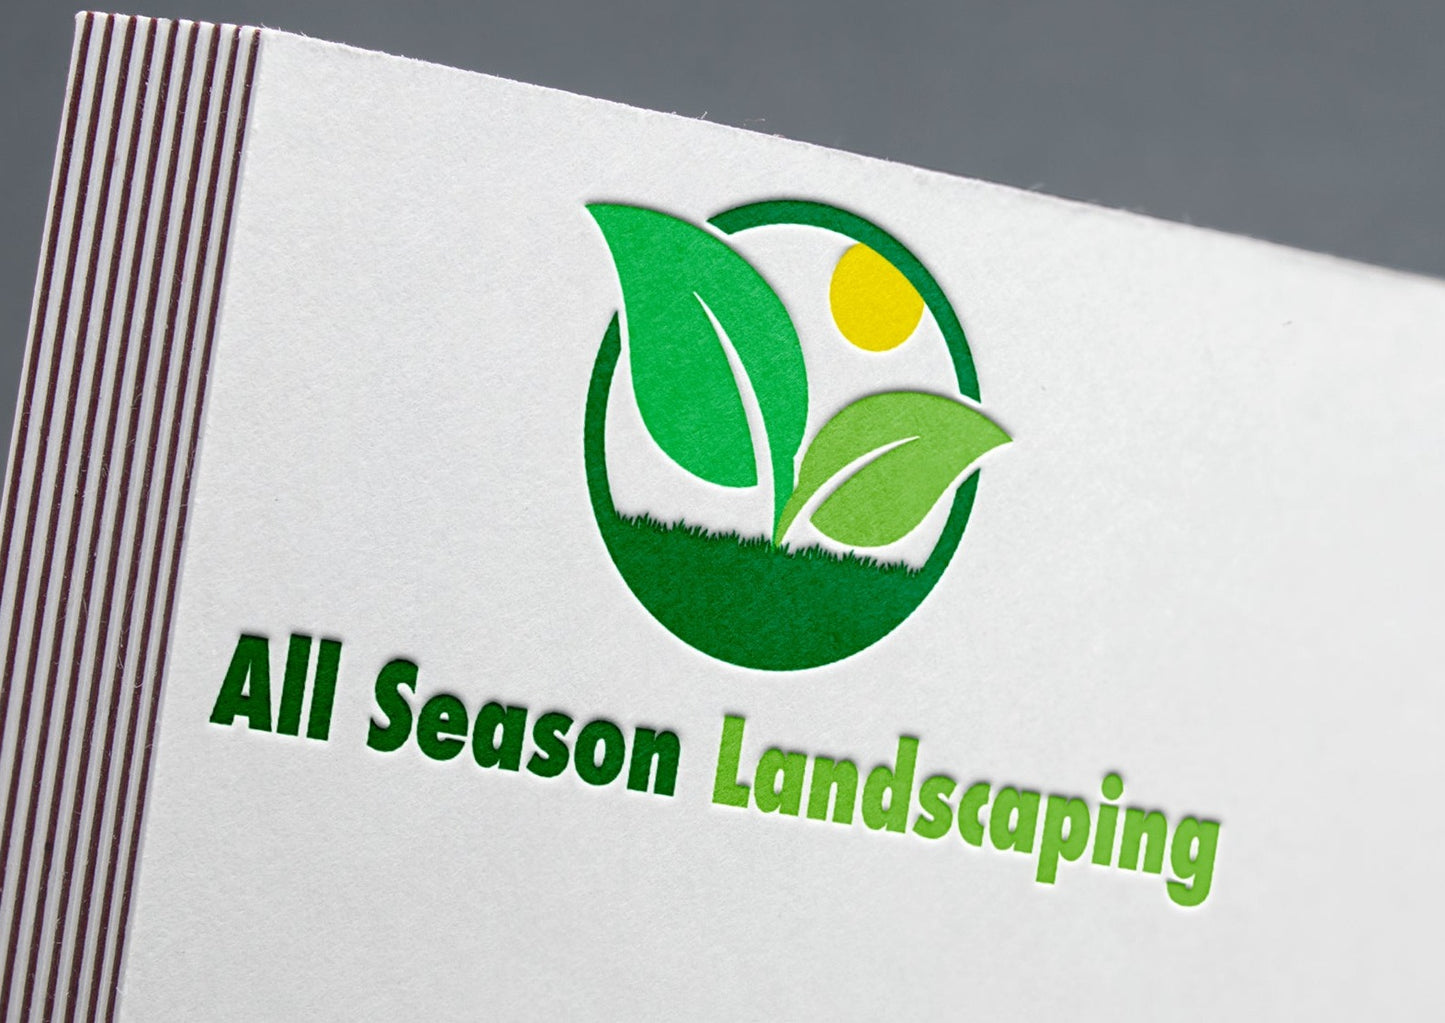 landscaping lawn care business company logo design